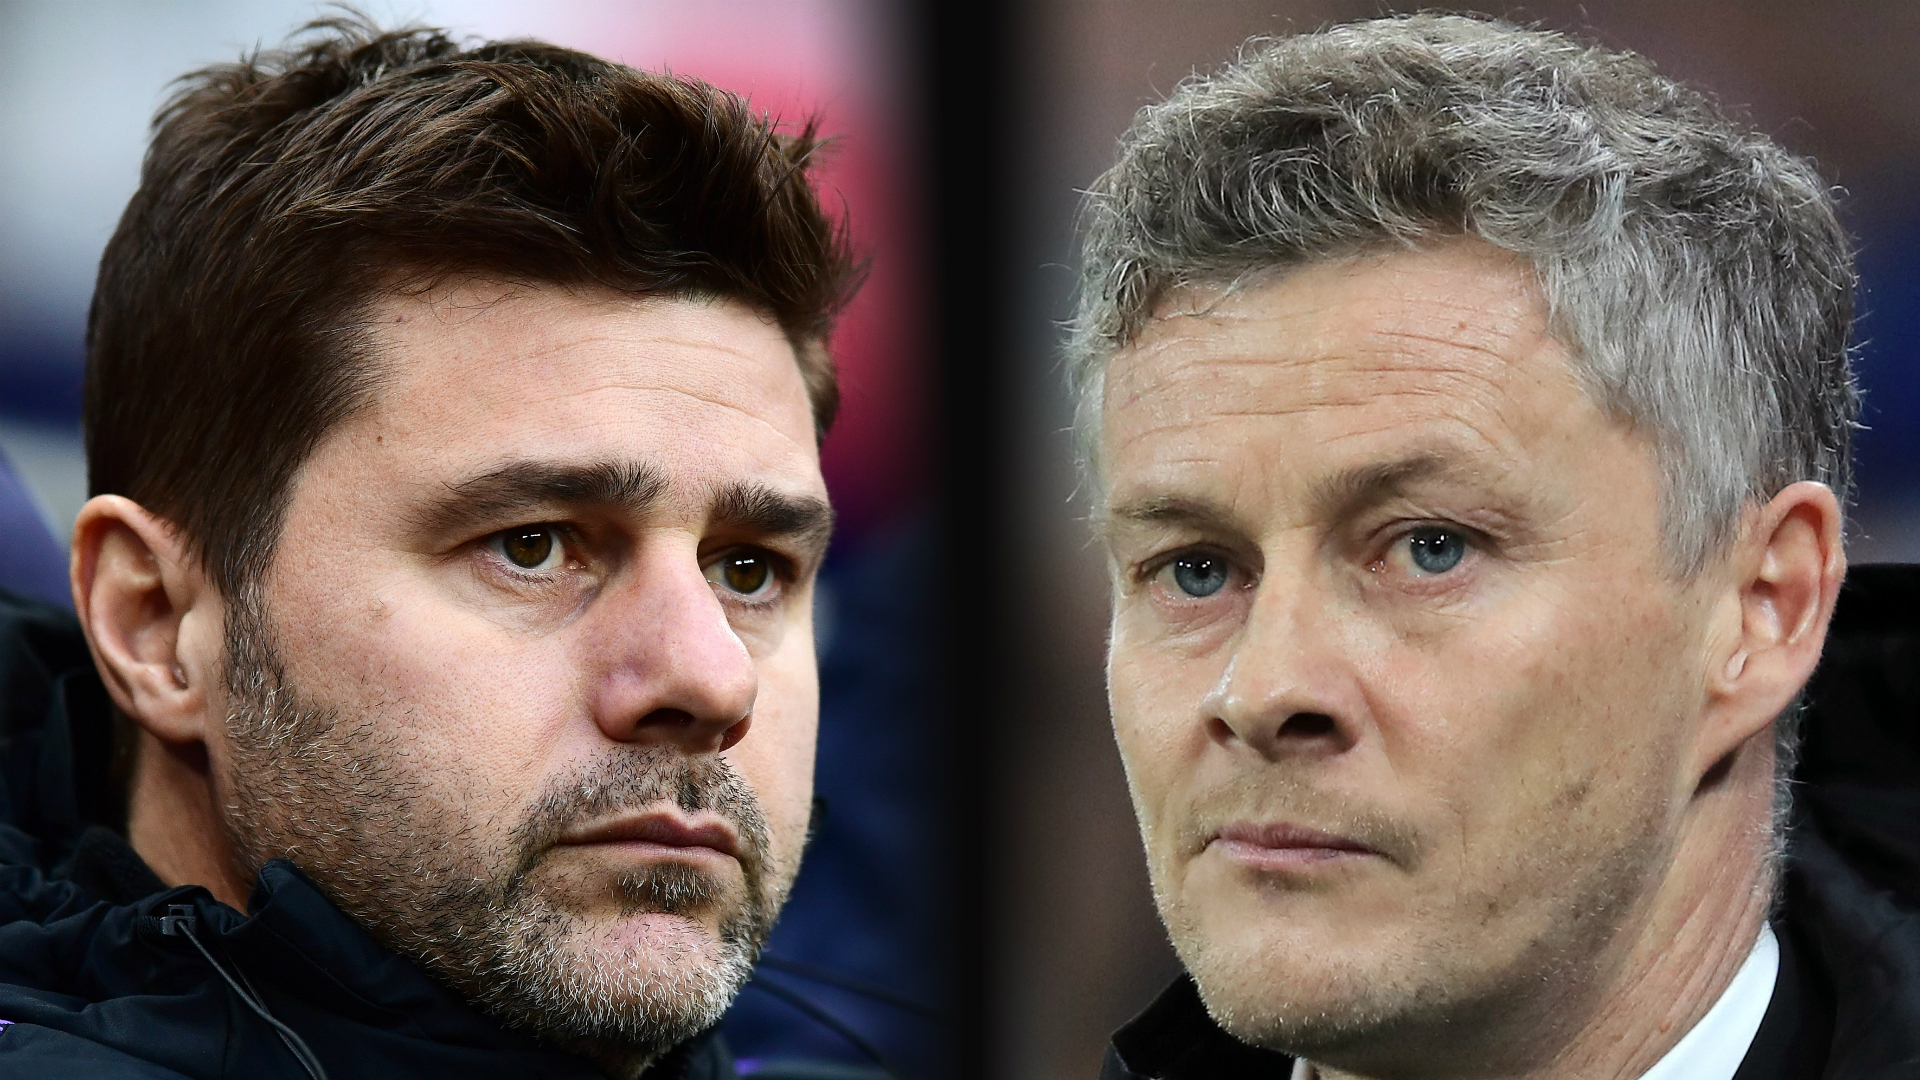 Manchester United's trip to Tottenham is not about Mauricio Pochettino or Ole Gunnar Solskjaer, according to the Red Devils boss.